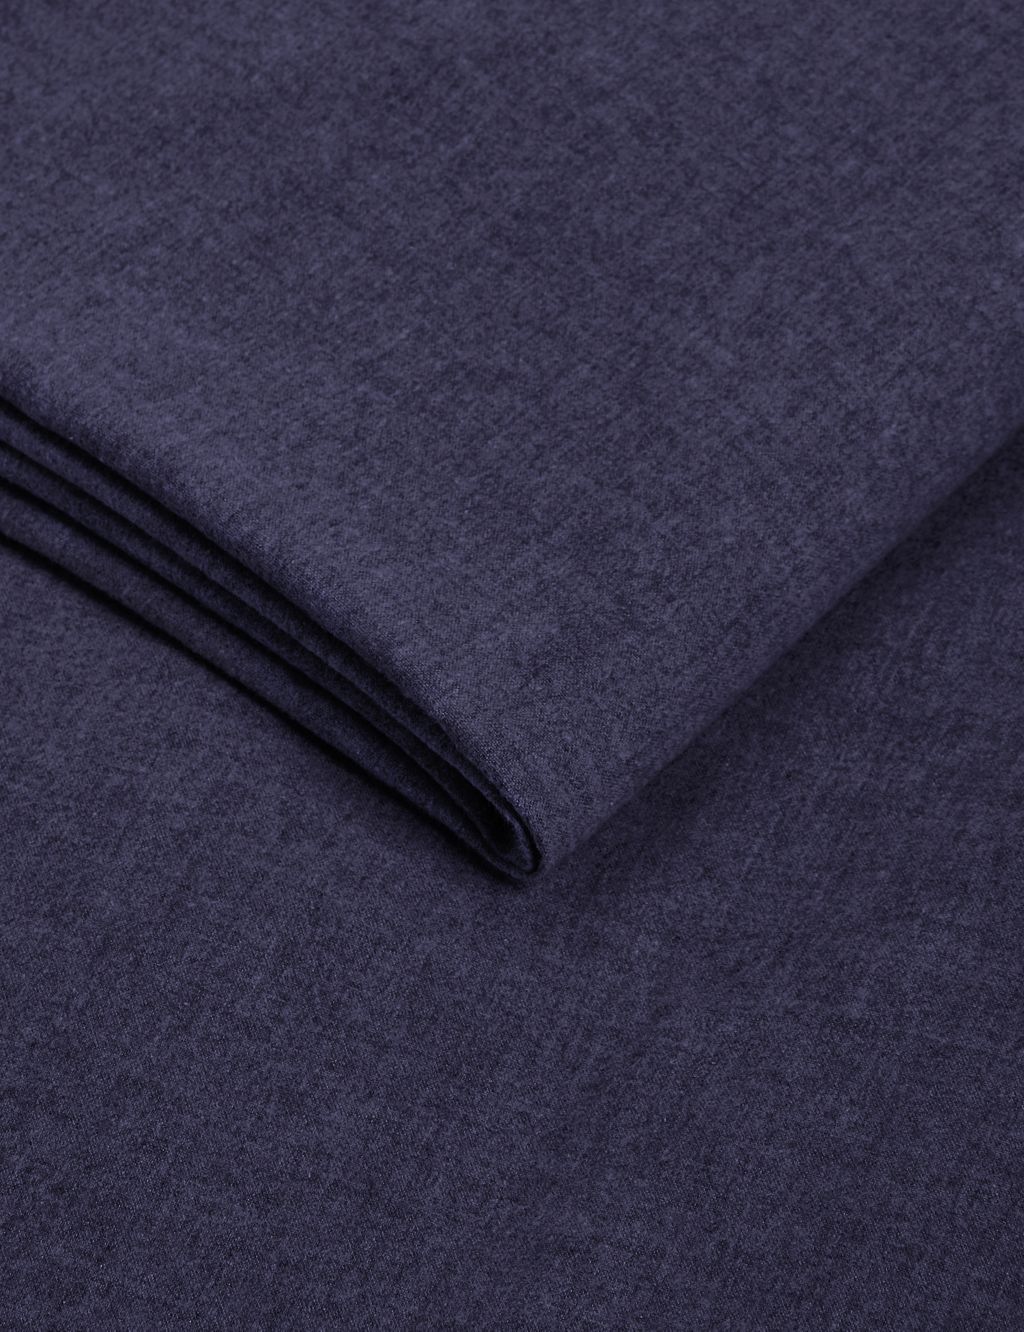 Pure Brushed Cotton Fitted Sheet image 2